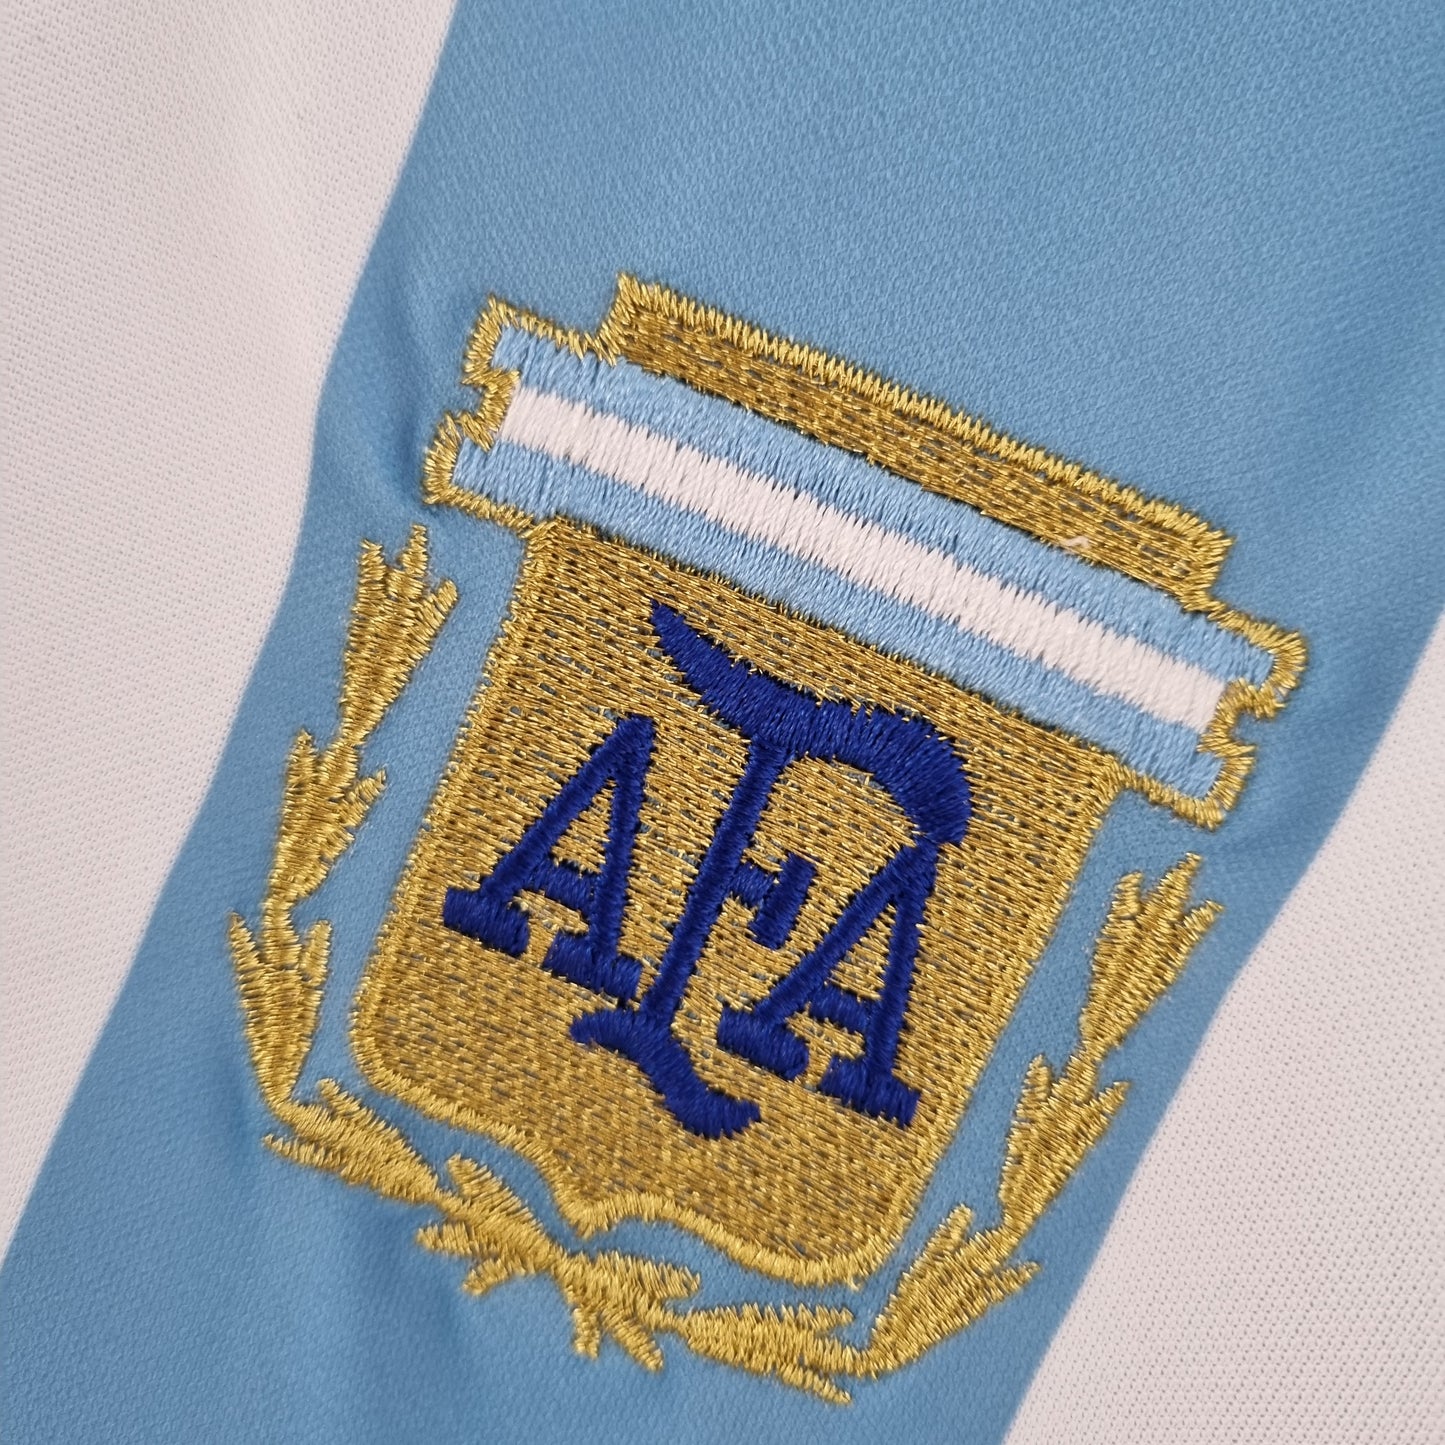 Argentina 1993 Home Jersey